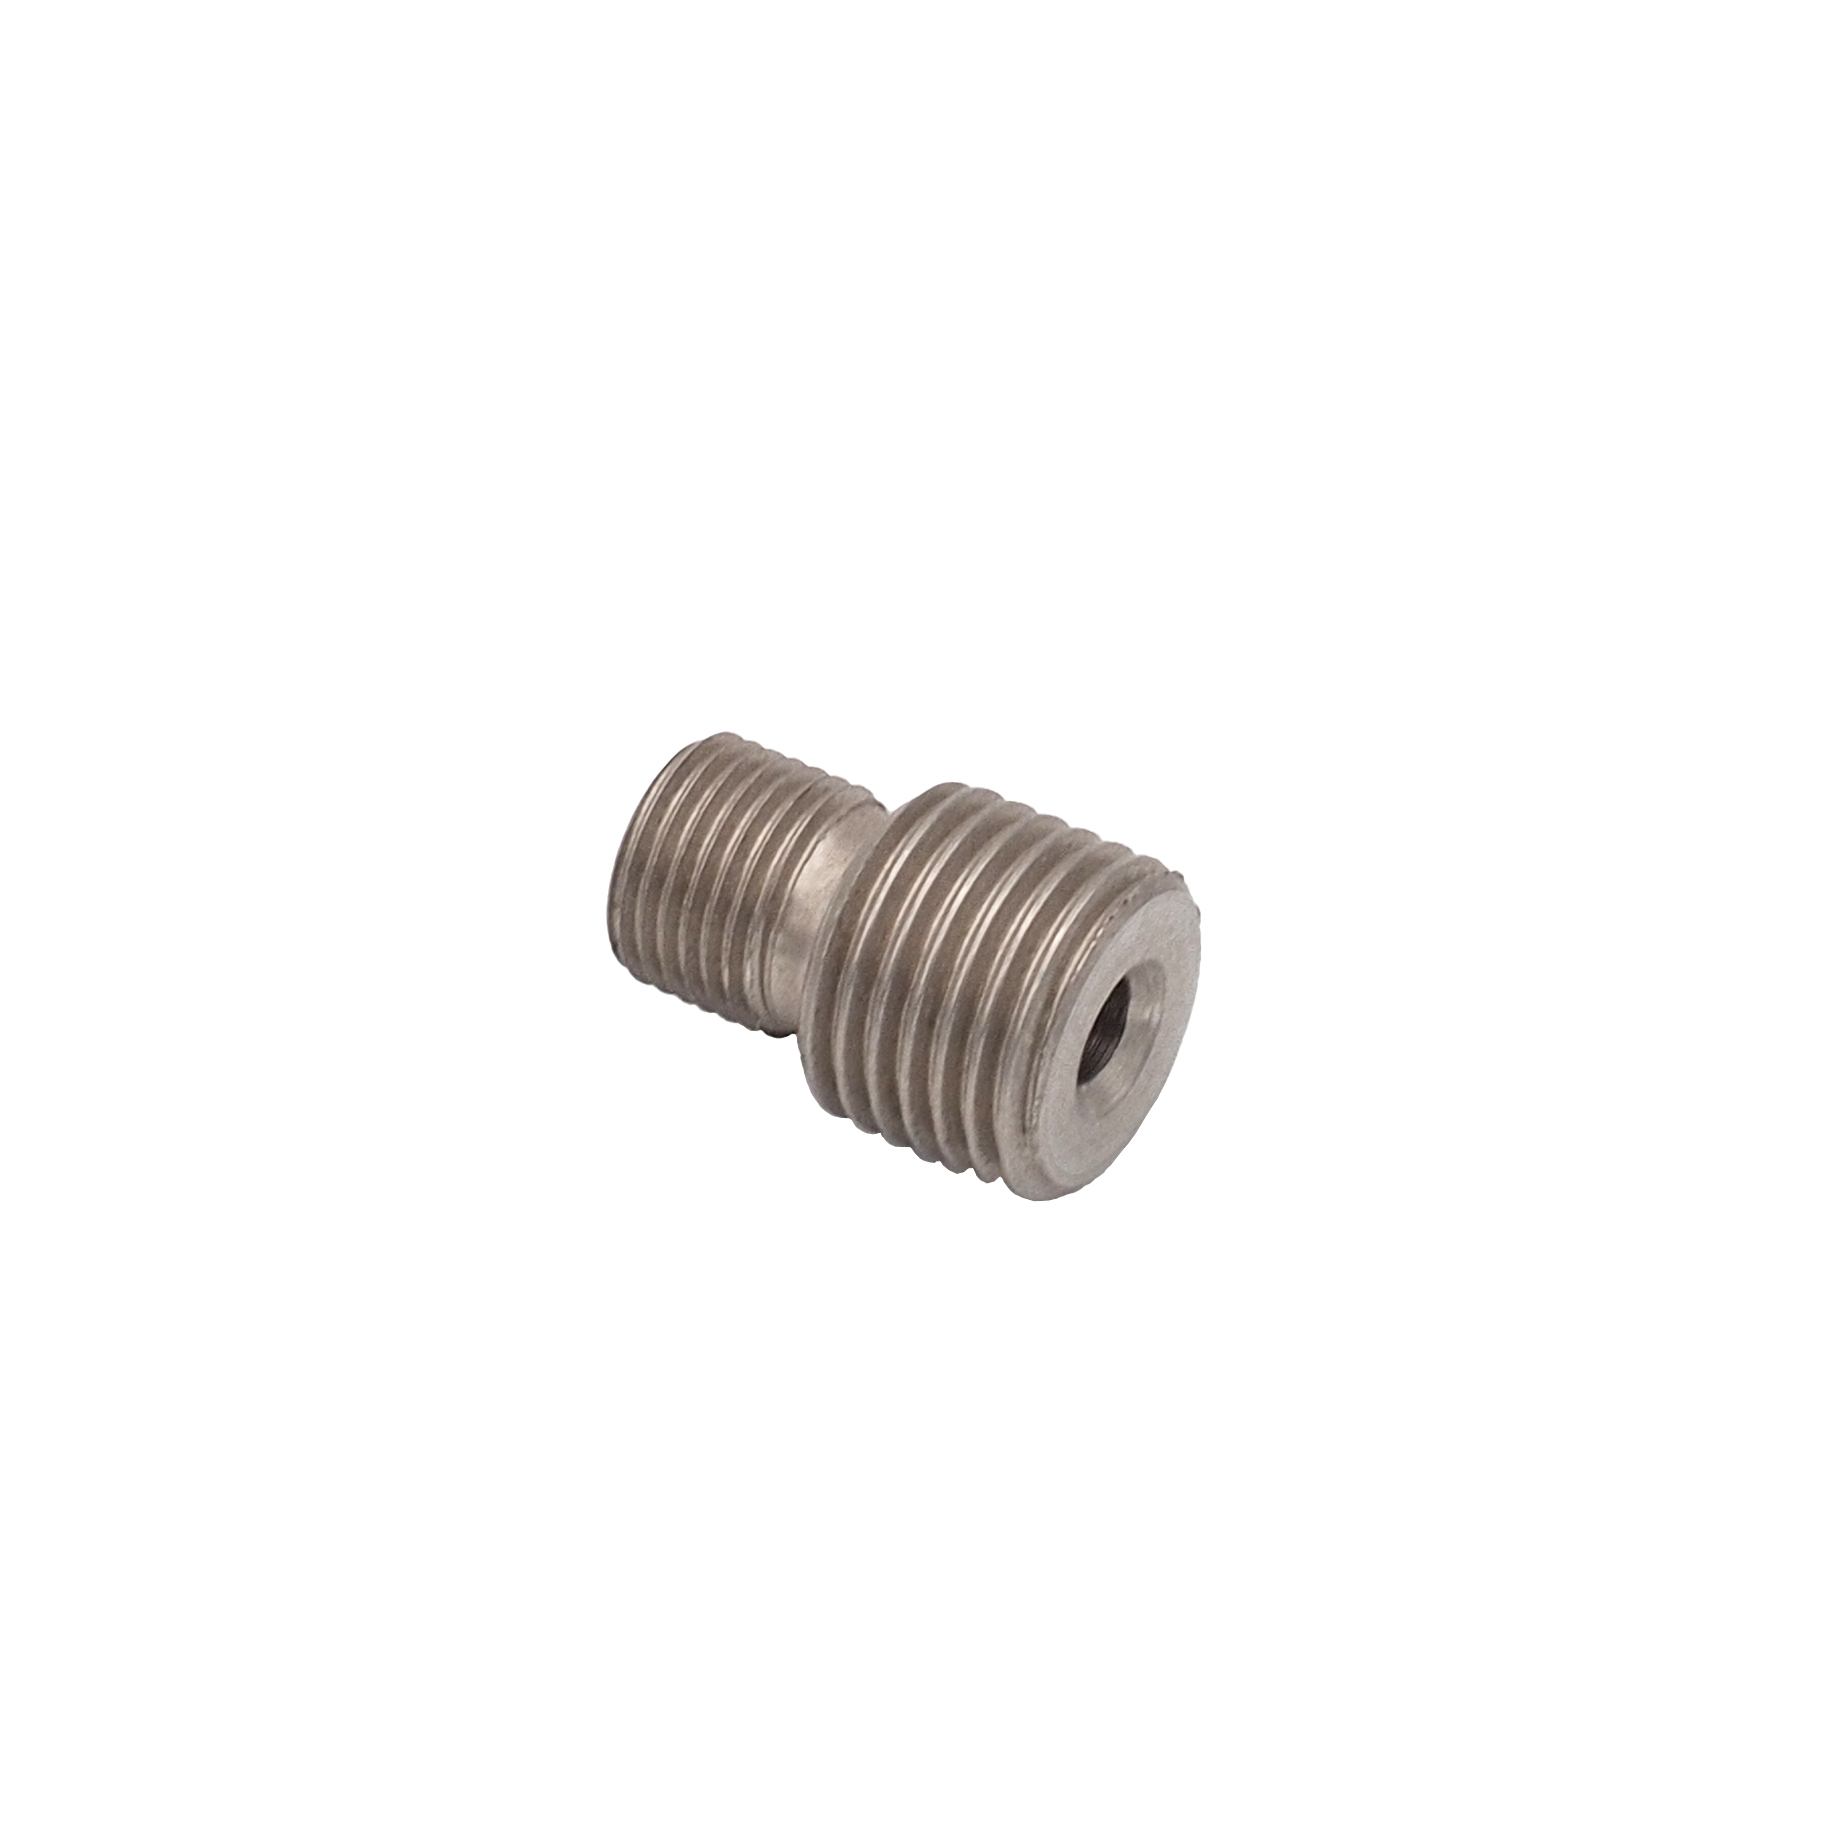 Double nipple 1/8" - 1/4"
stainless steel